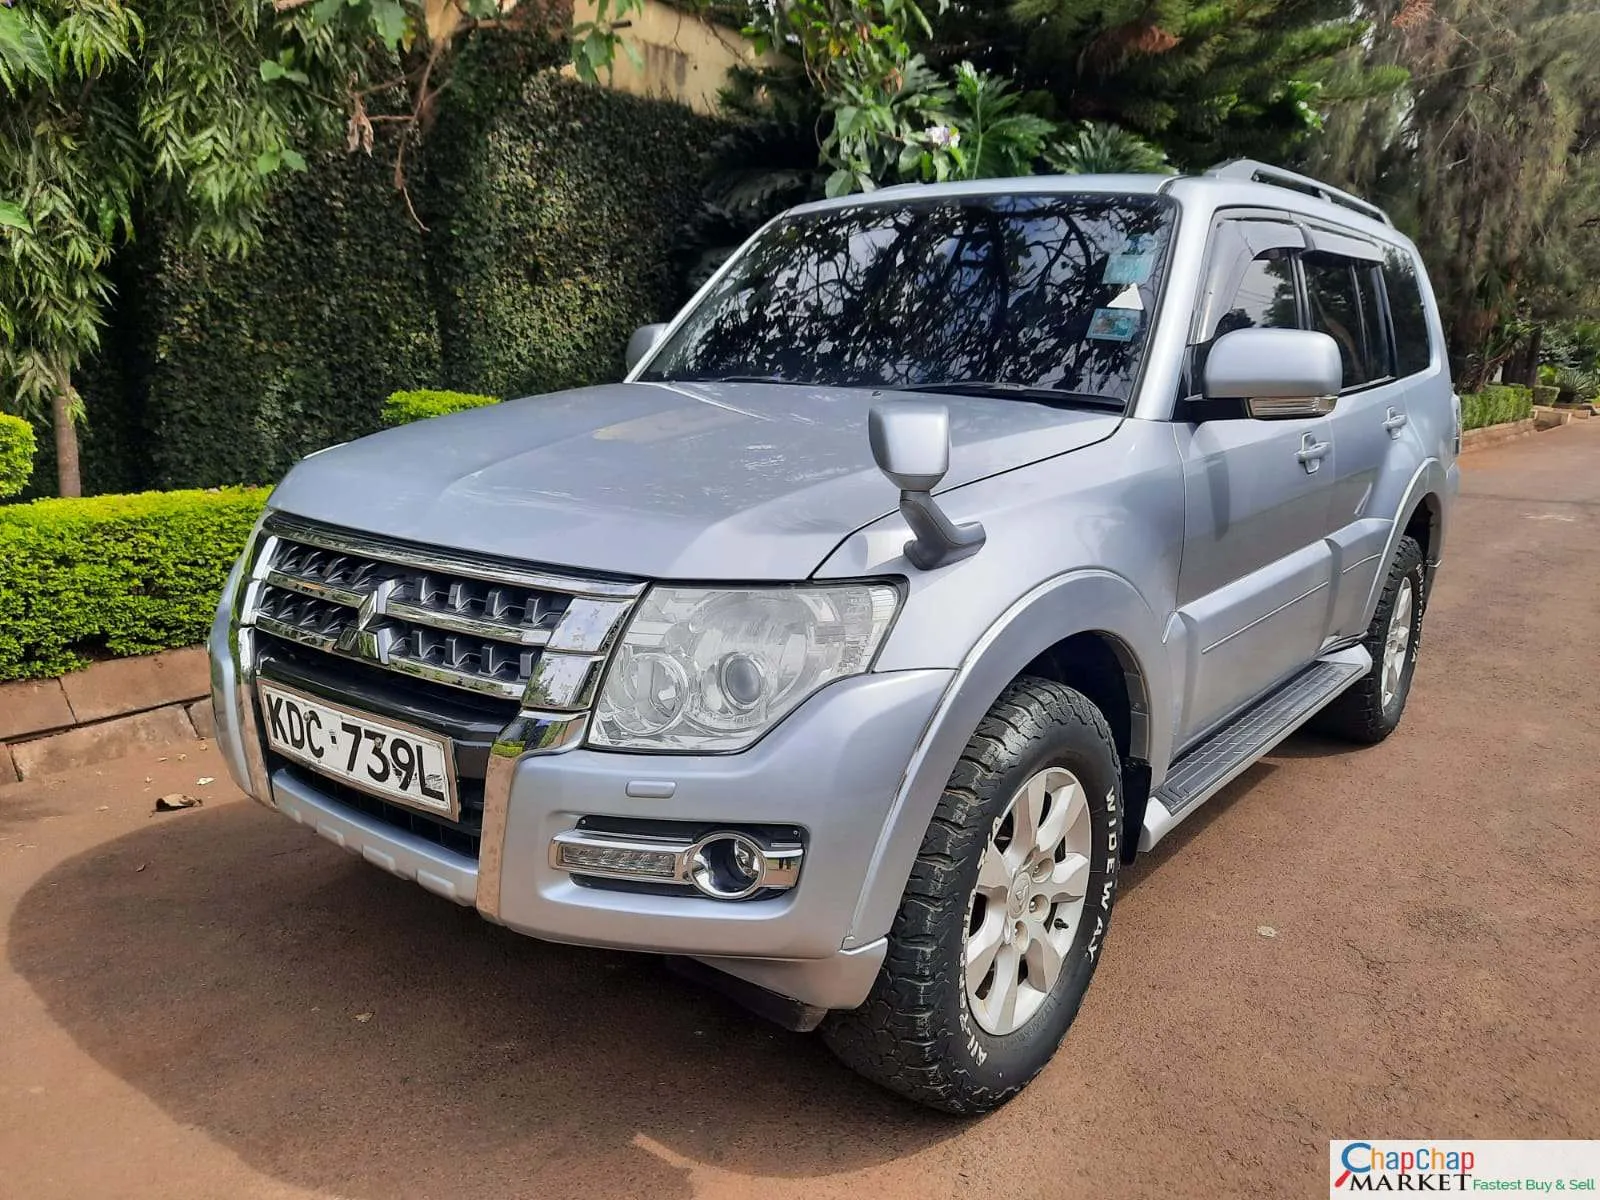 Cars Cars For Sale/Vehicles-Mitsubishi Pajero For sale in Kenya fully loaded You Pay 30% Deposit Trade in Ok EXCLUSIVE 9